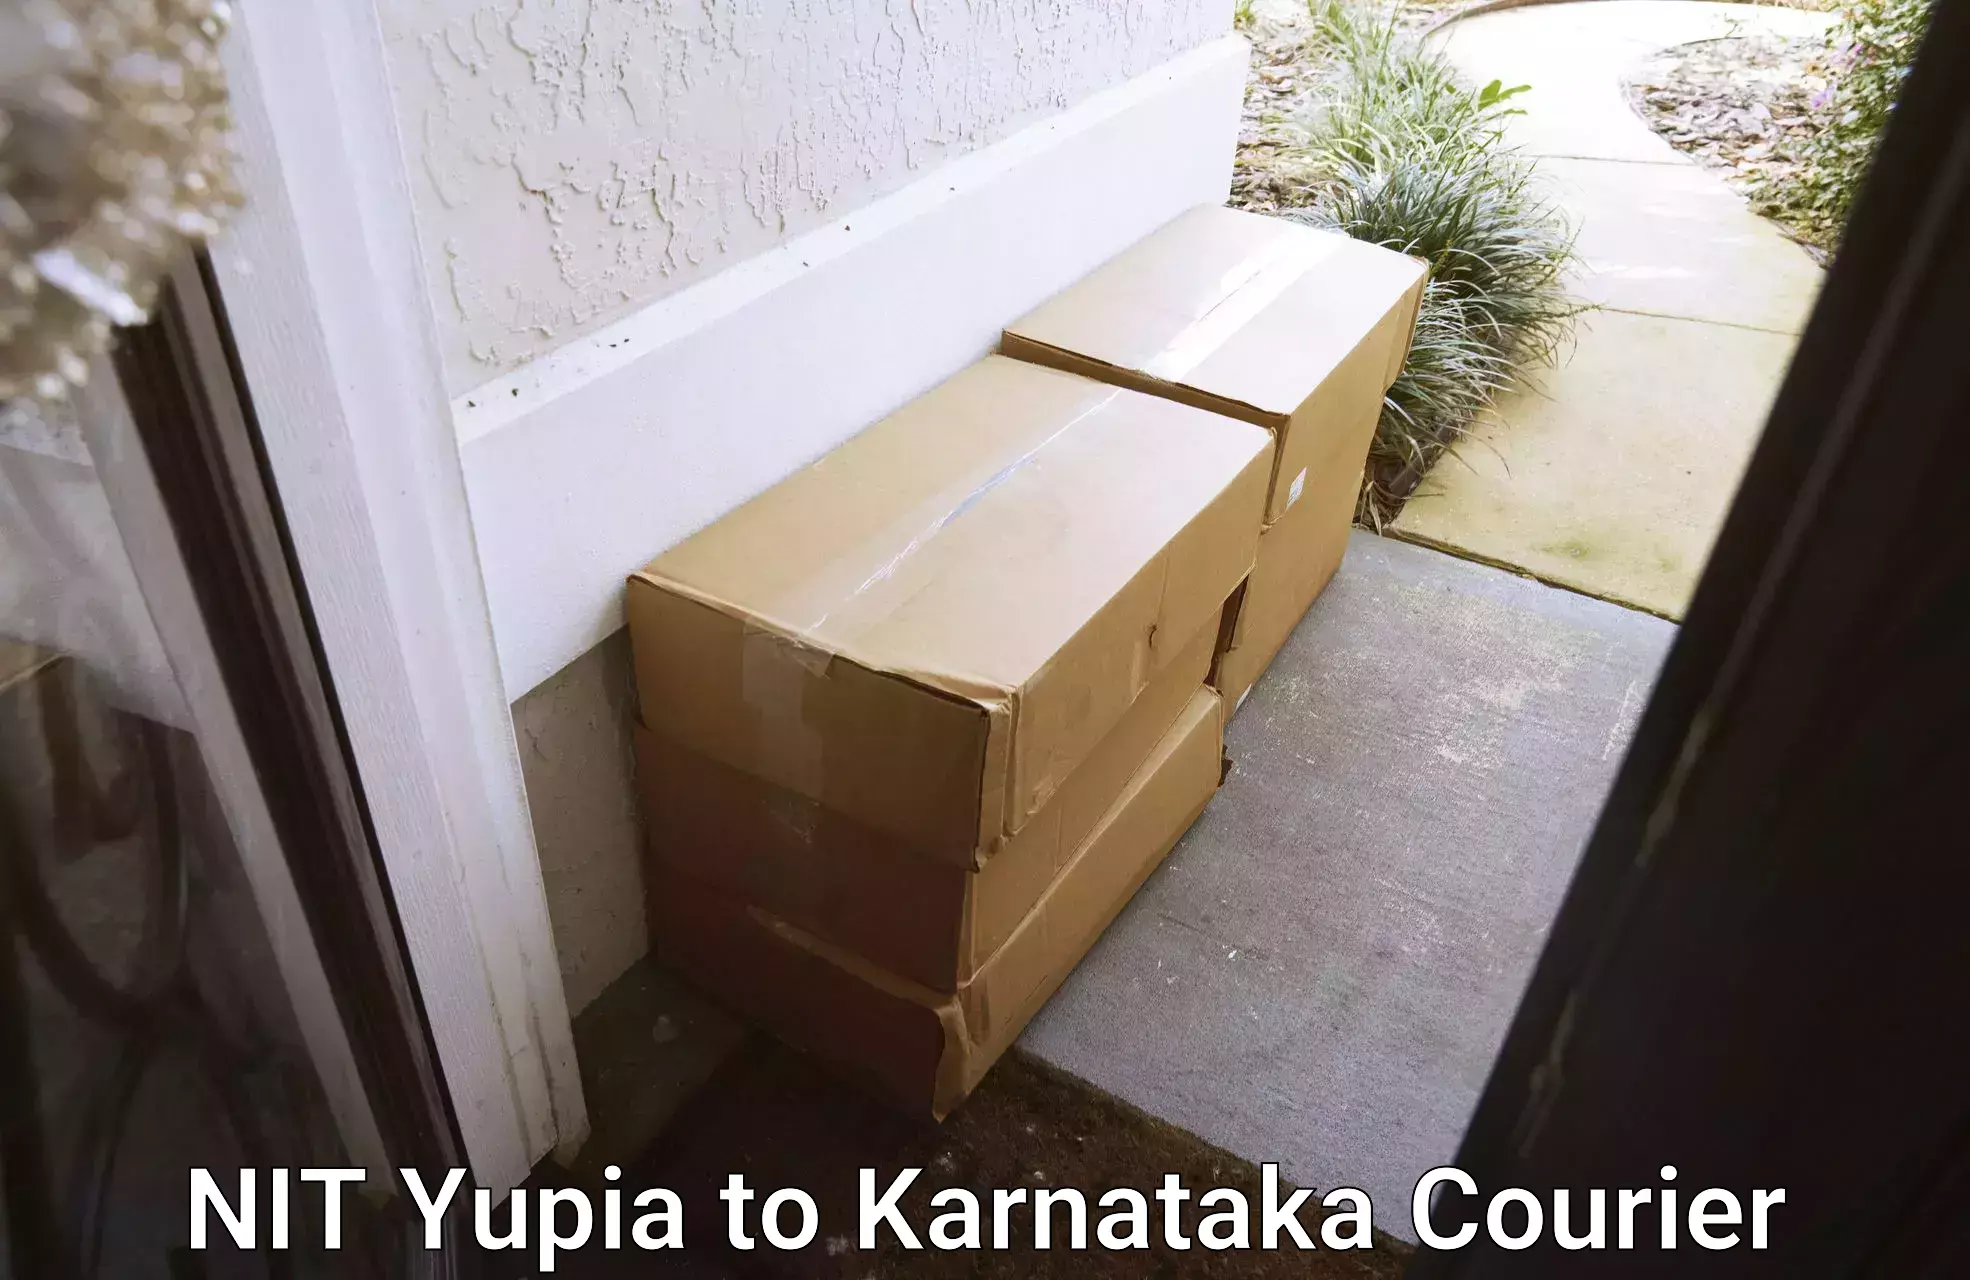 Custom courier packaging in NIT Yupia to Koppal